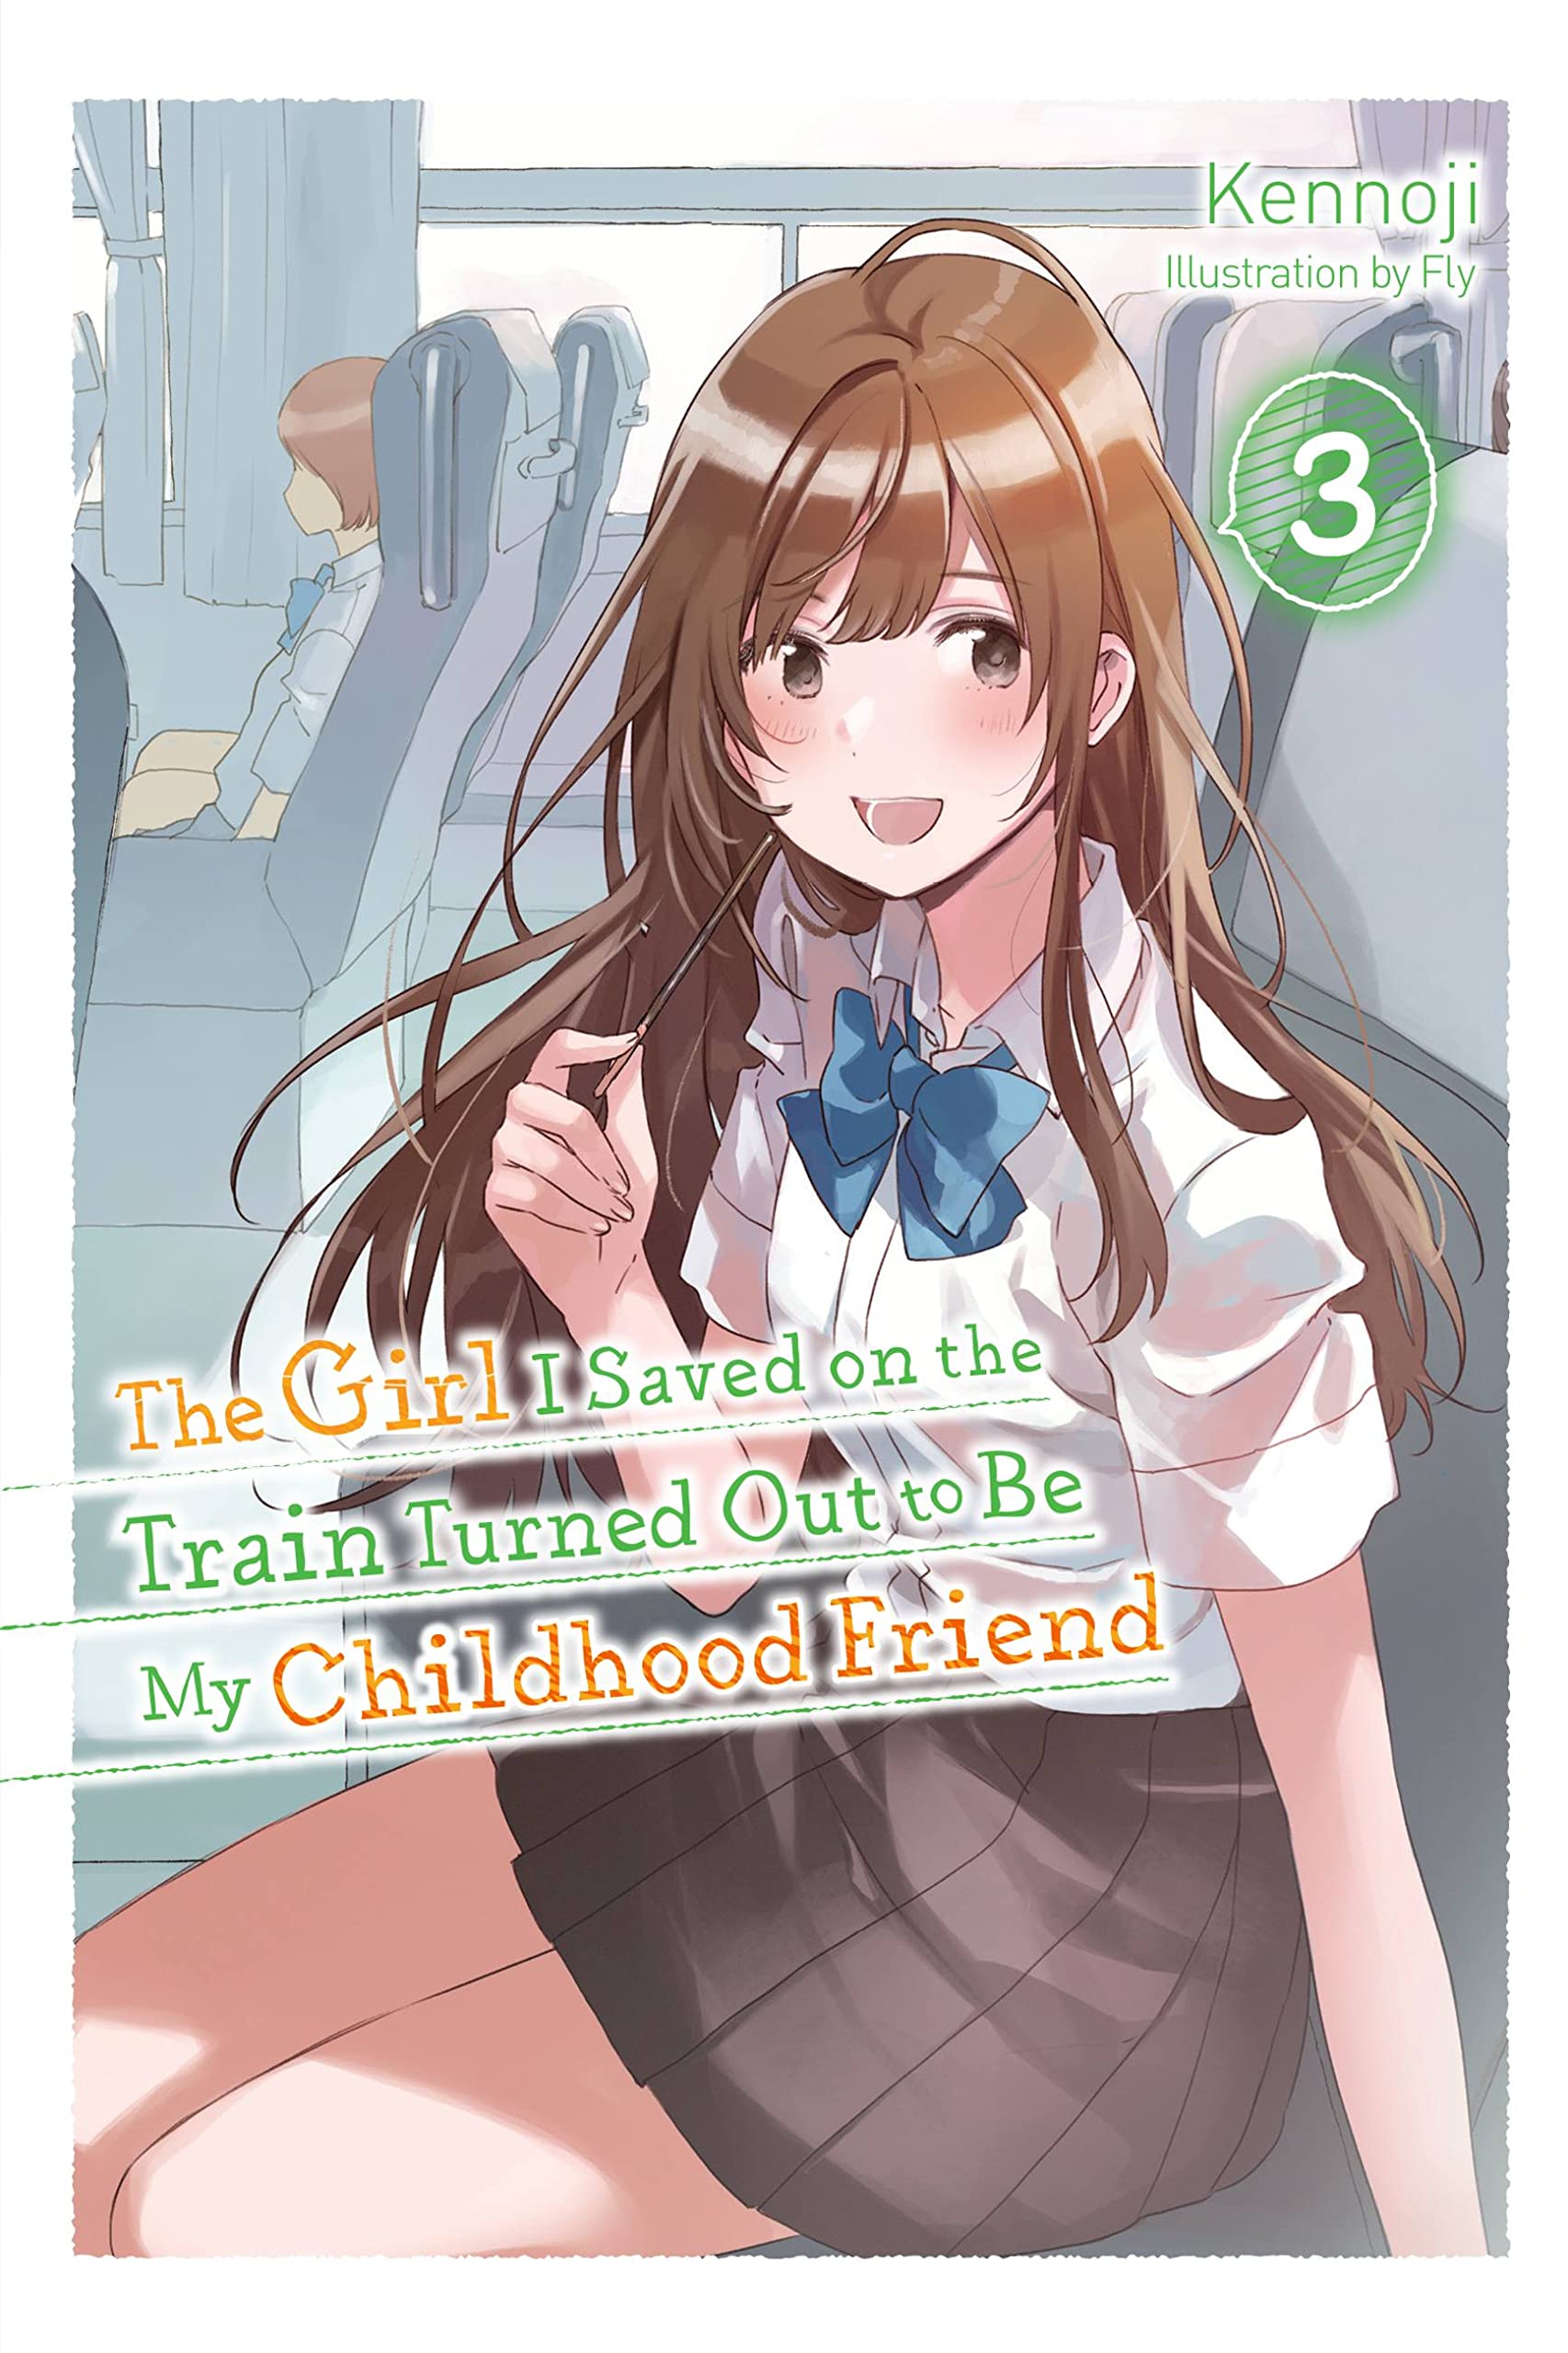 The Girl I Saved on the Train Turned Out to Be My Childhood Friend Vol. 03 (Light Novel)